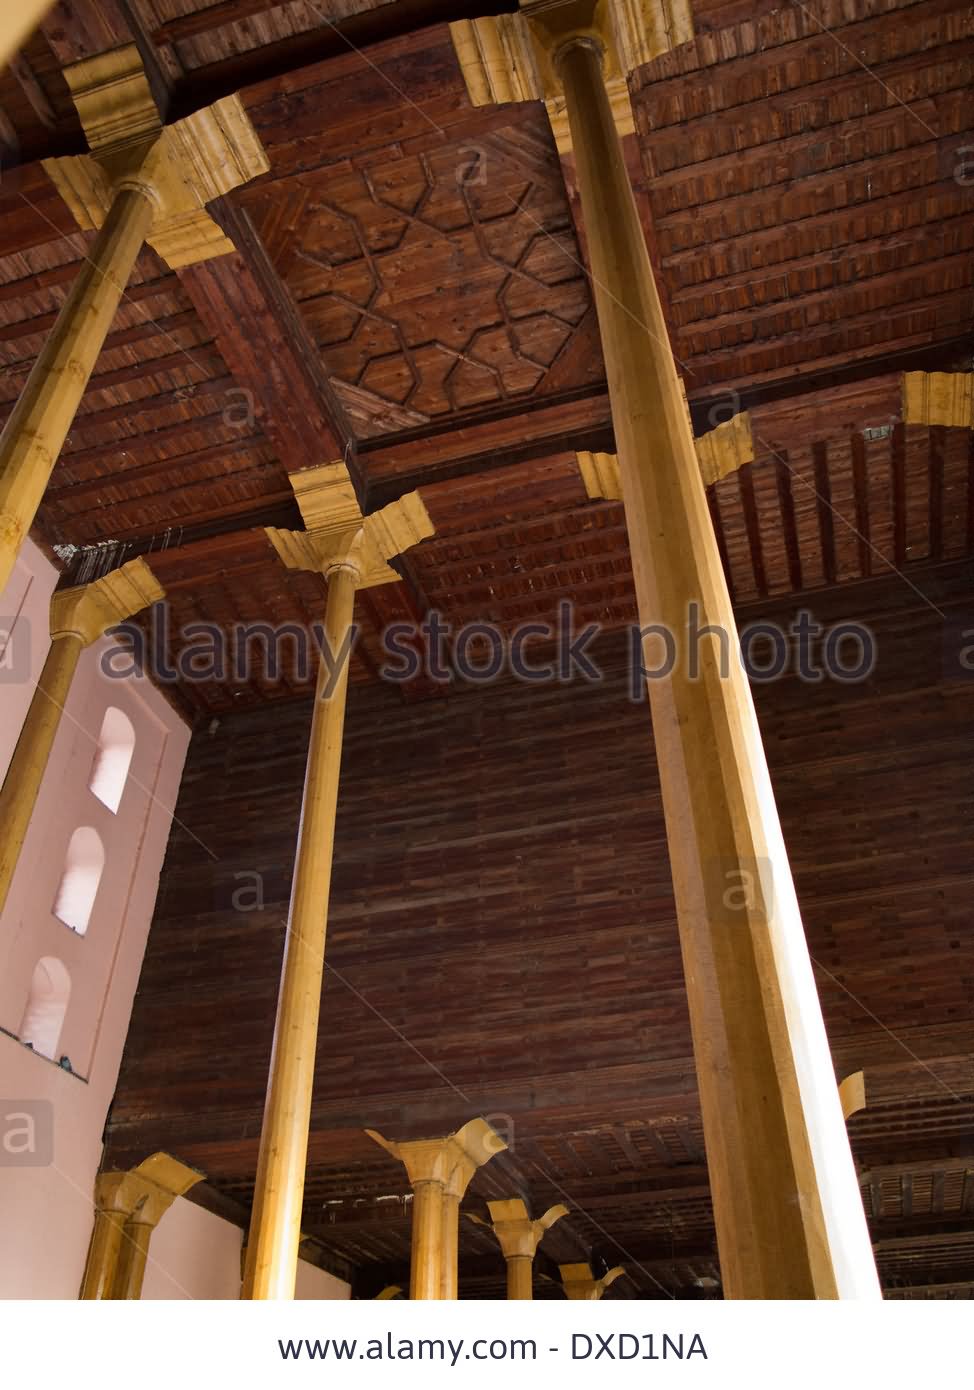 Wooden Ceiling And Columns Inside The Jamia Masjid